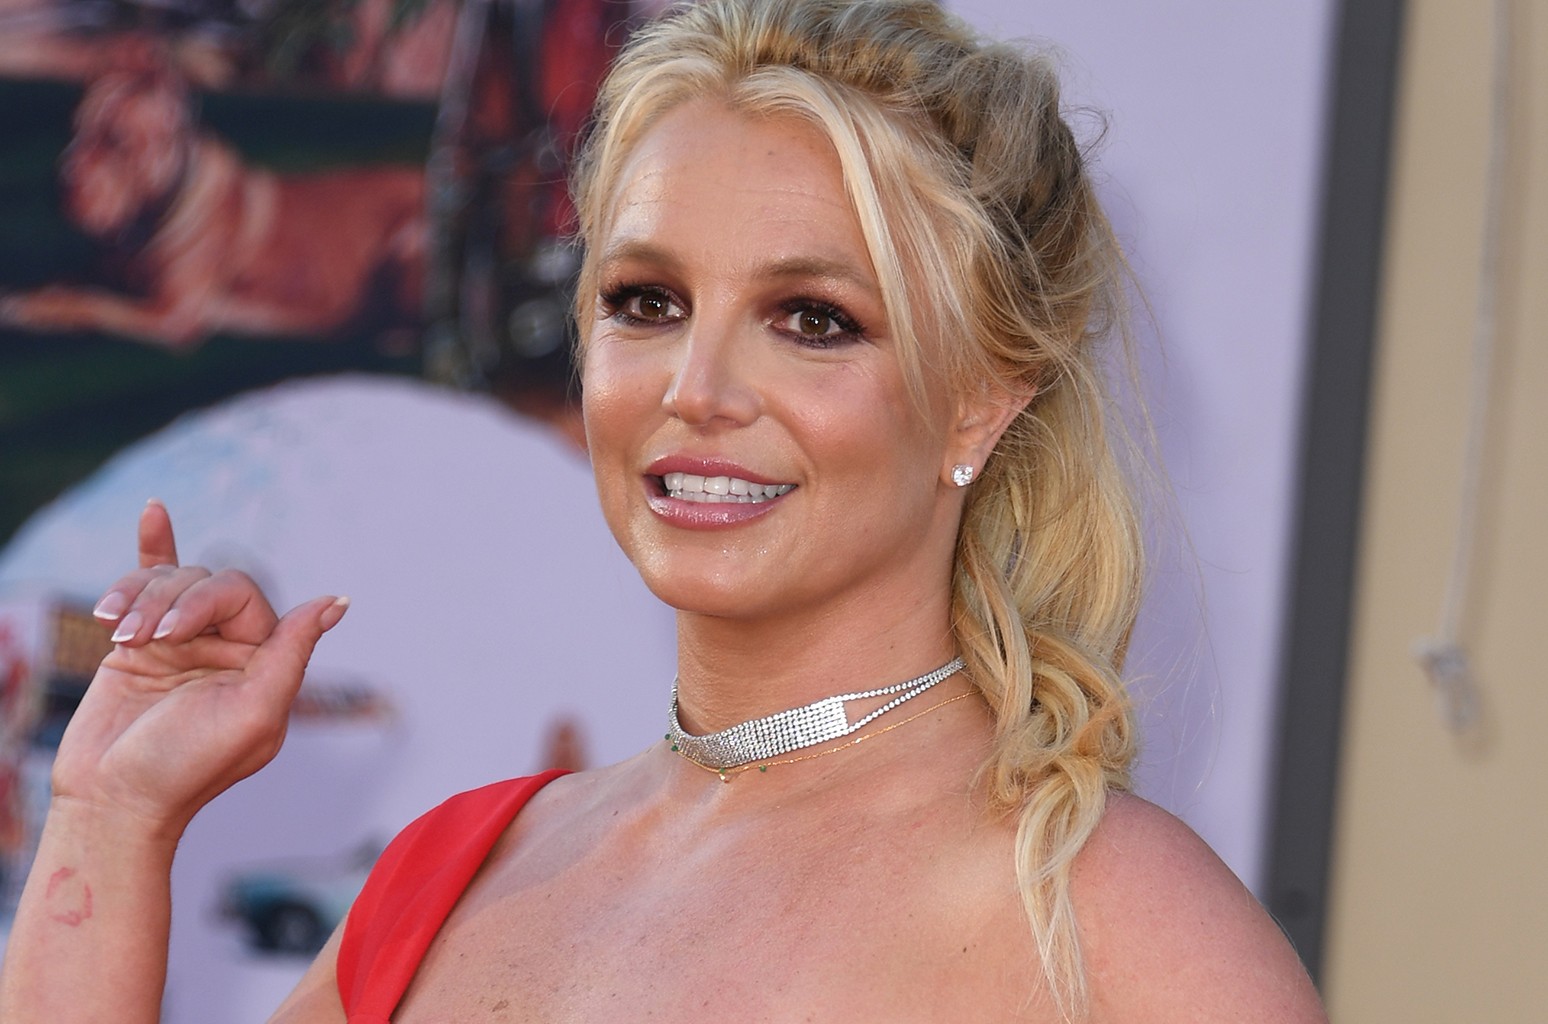 Free Britney Spears campaign successful, celebrities rejoice the end of her conservatorship!